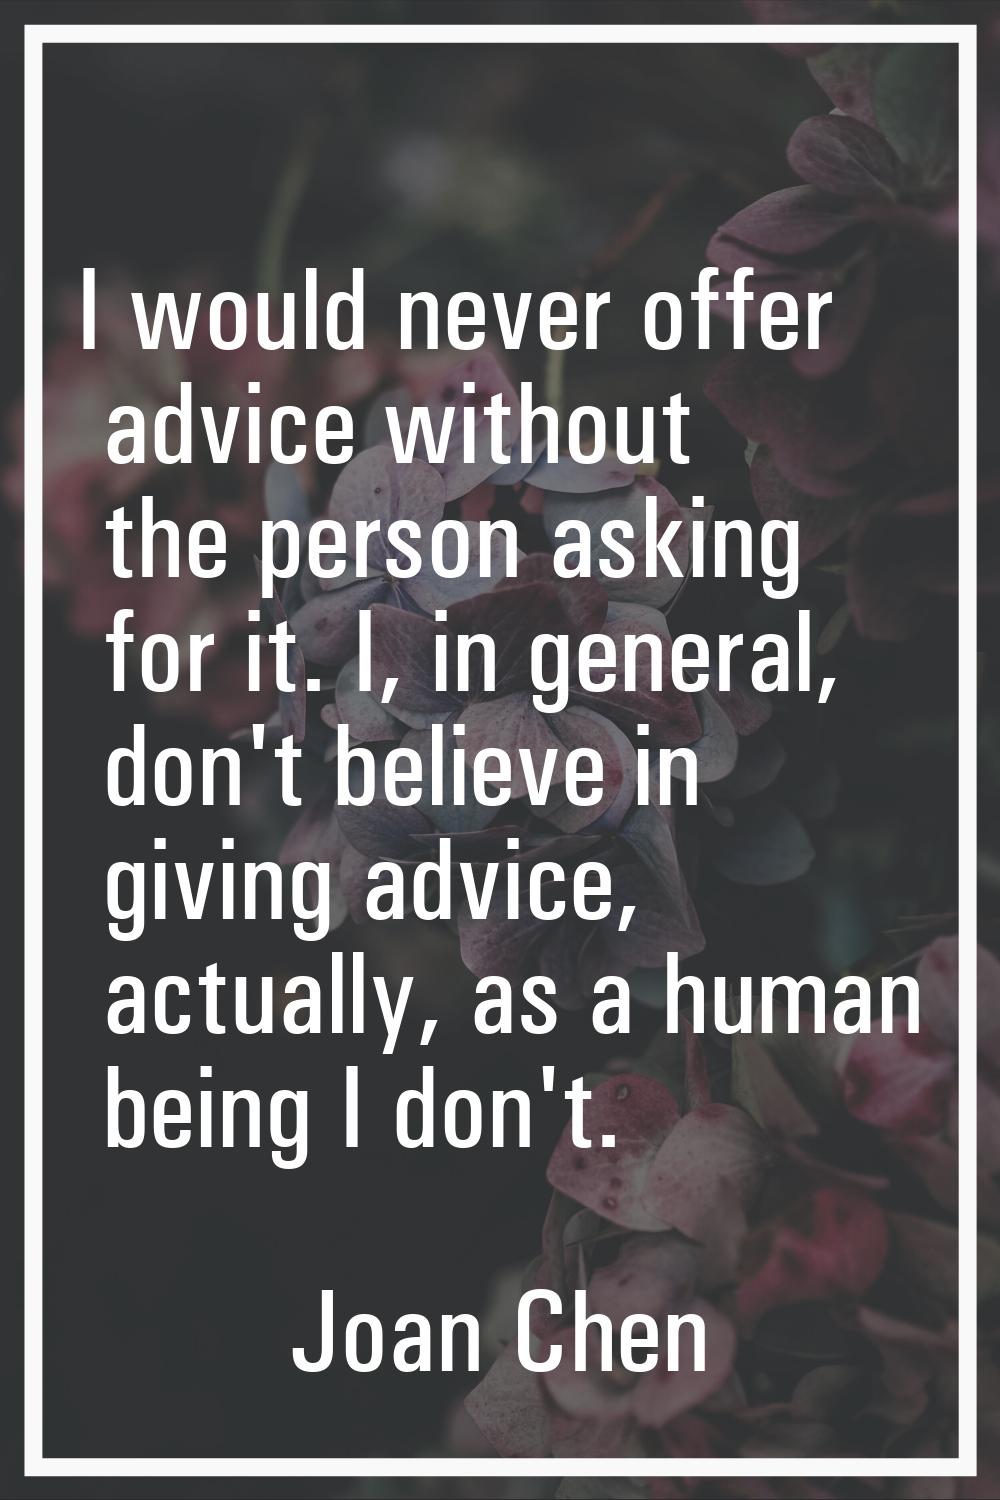 I would never offer advice without the person asking for it. I, in general, don't believe in giving